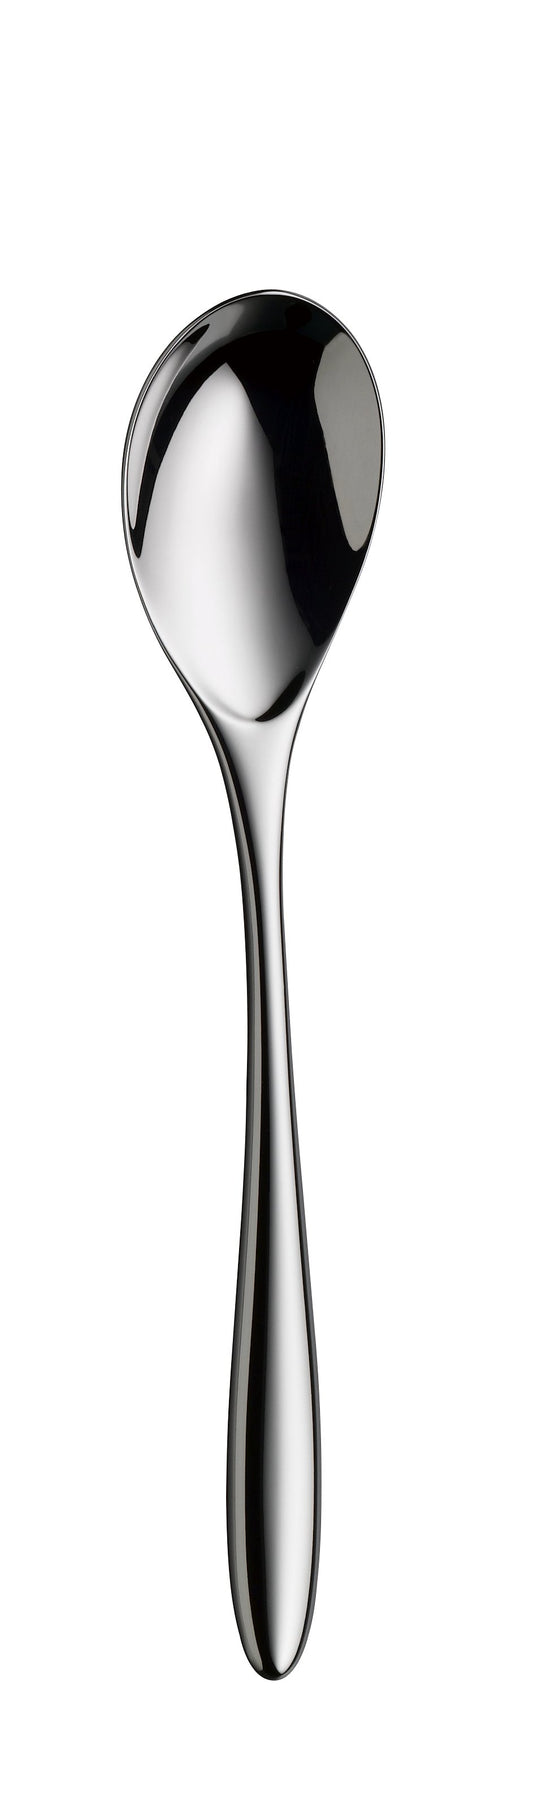 Dessert spoon AVES silver plated 201mm